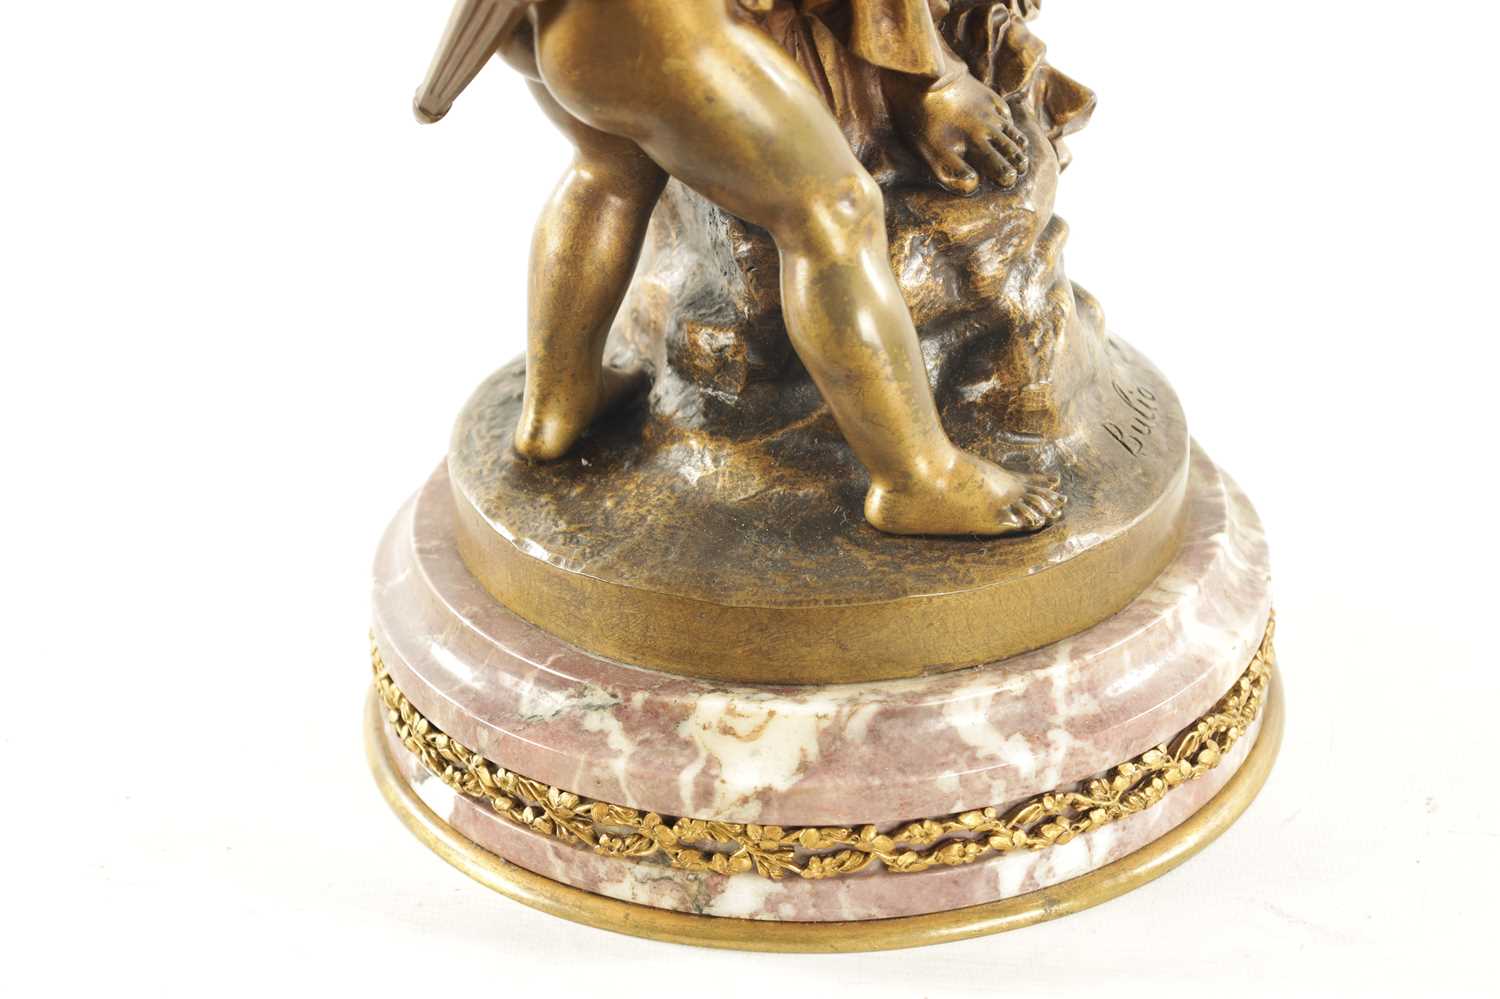 JEAN BULIO (FRENCH 1827 - 1911) A 19TH CENTURY GILT BRONZE FIGURE DEPICTING ‘PSYCHE AND LOVE’ - Image 3 of 8